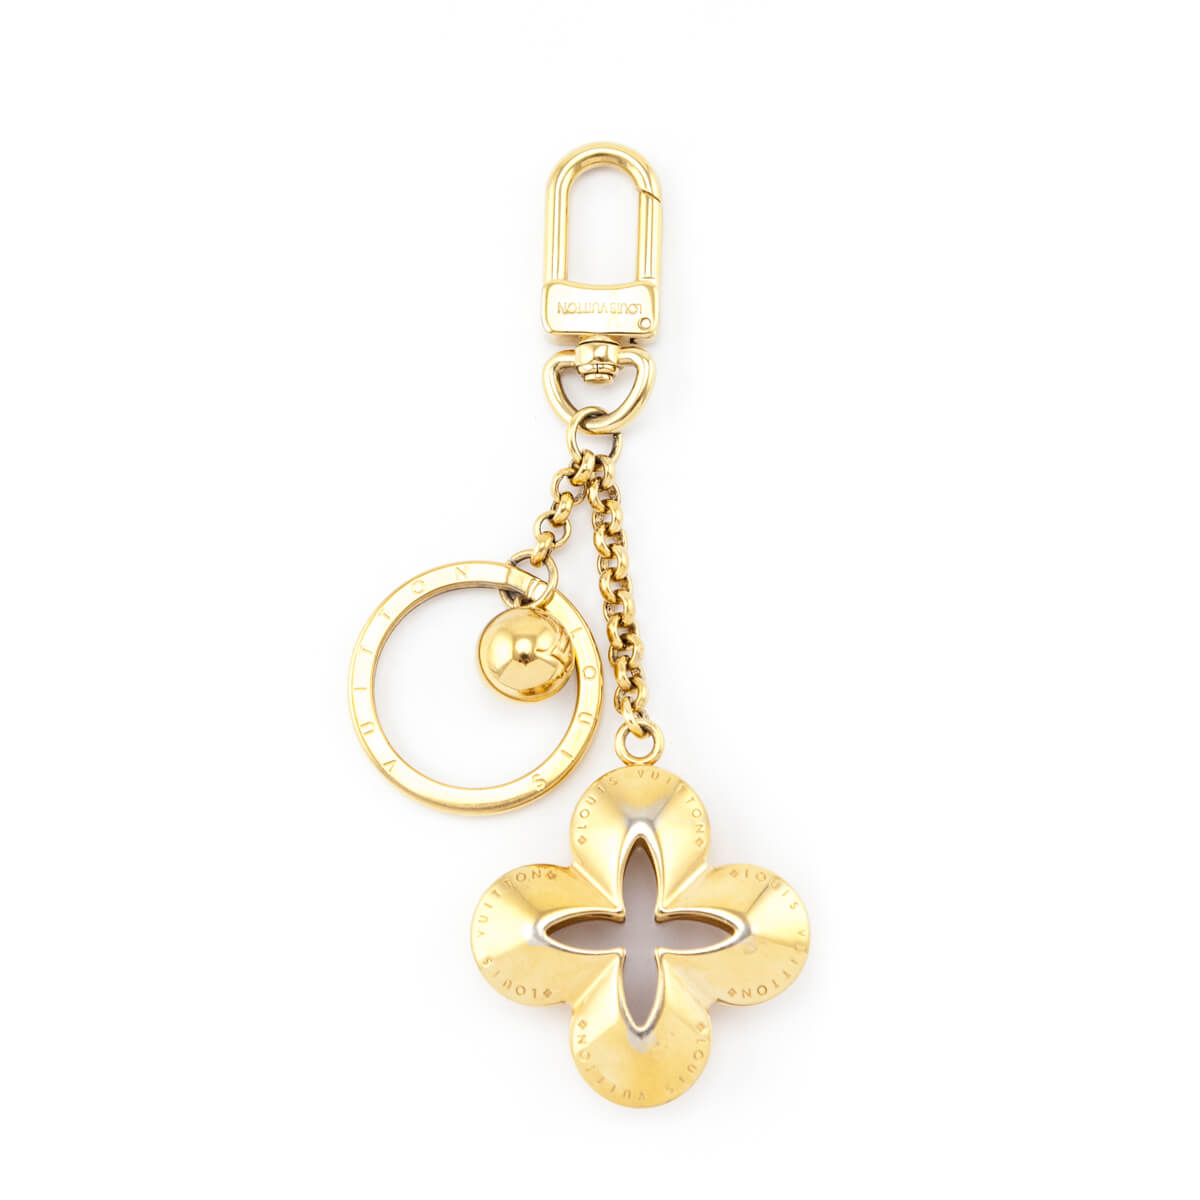 LOUIS VUITTON Monogram Flower Charm Gold Red yellow LV Auth 29863